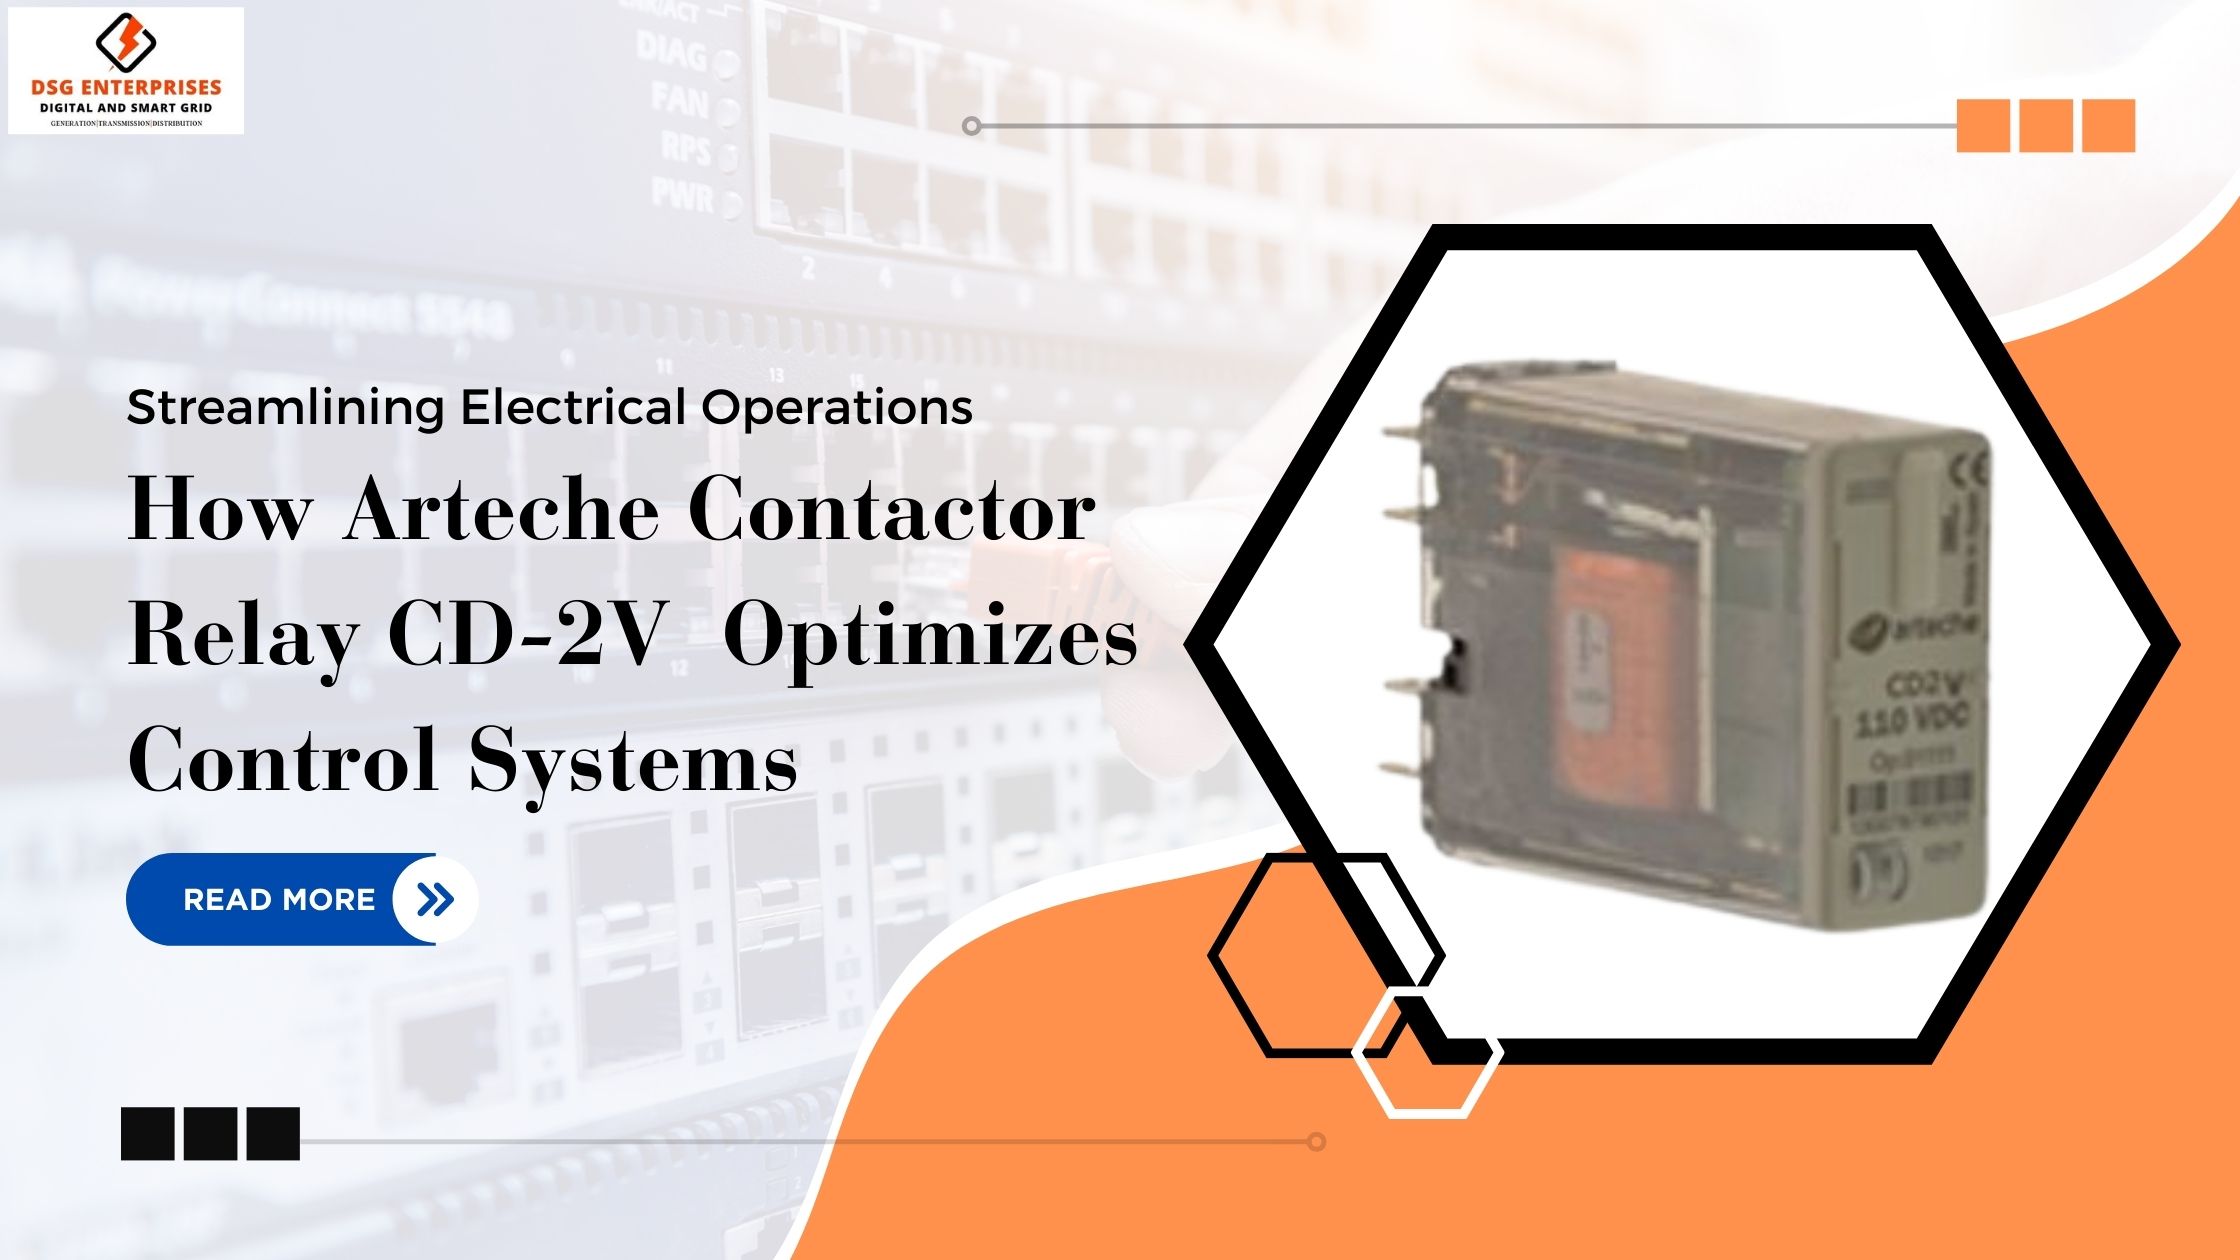 You are currently viewing Streamlining Electrical Operations: How Arteche Contactor Relay CD-2V Optimizes Control Systems